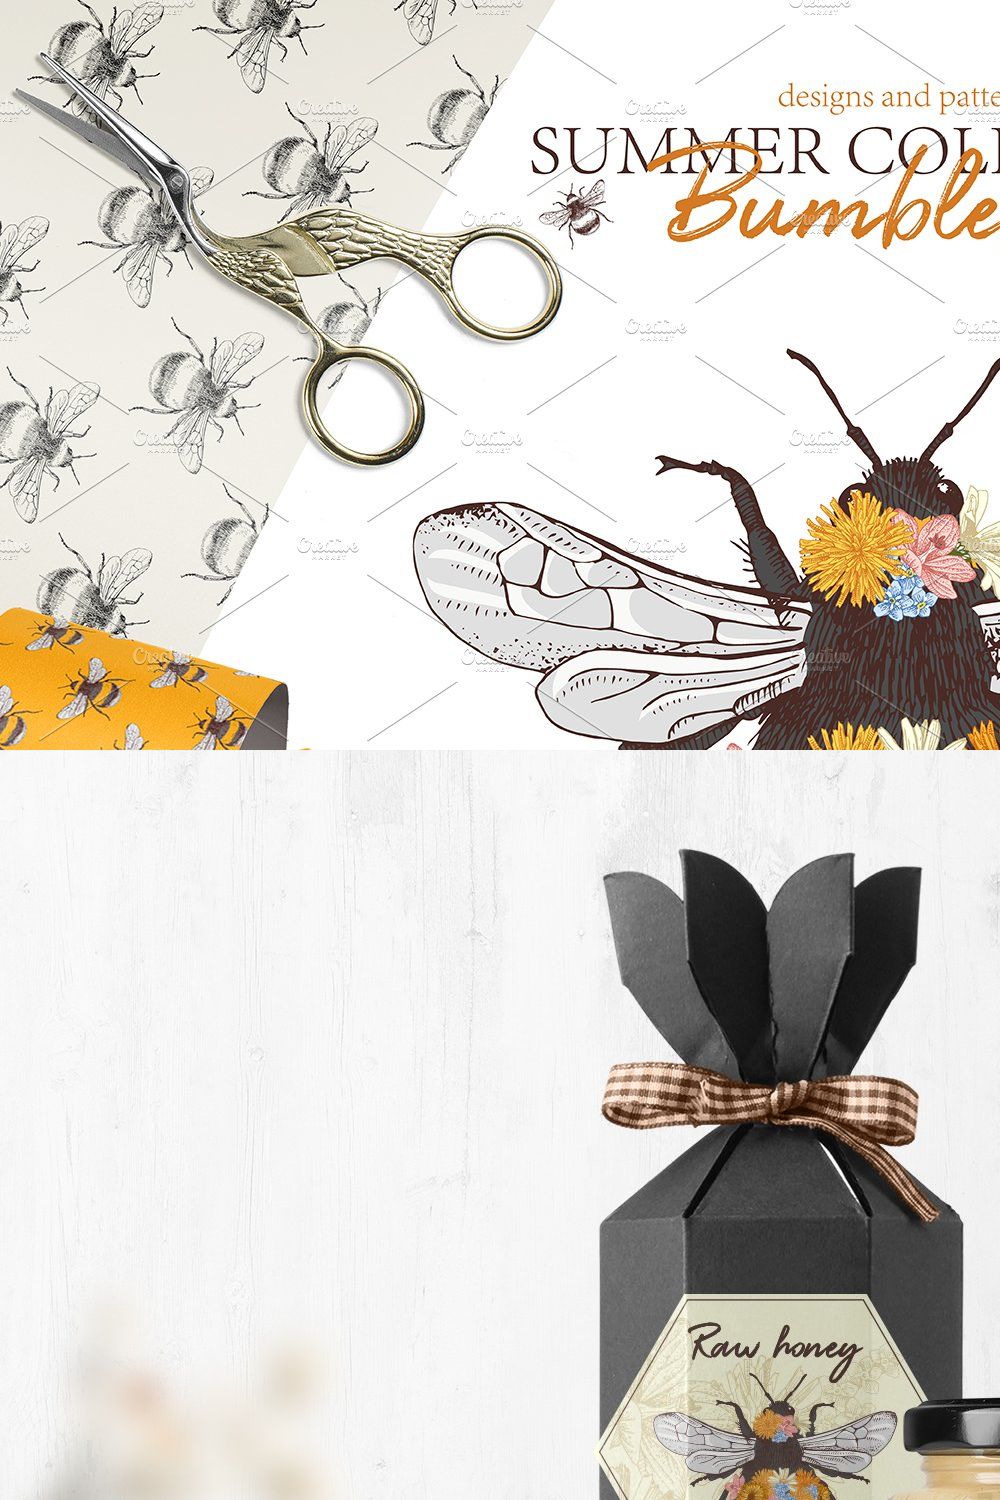 Designs and patterns with bumblebees pinterest preview image.